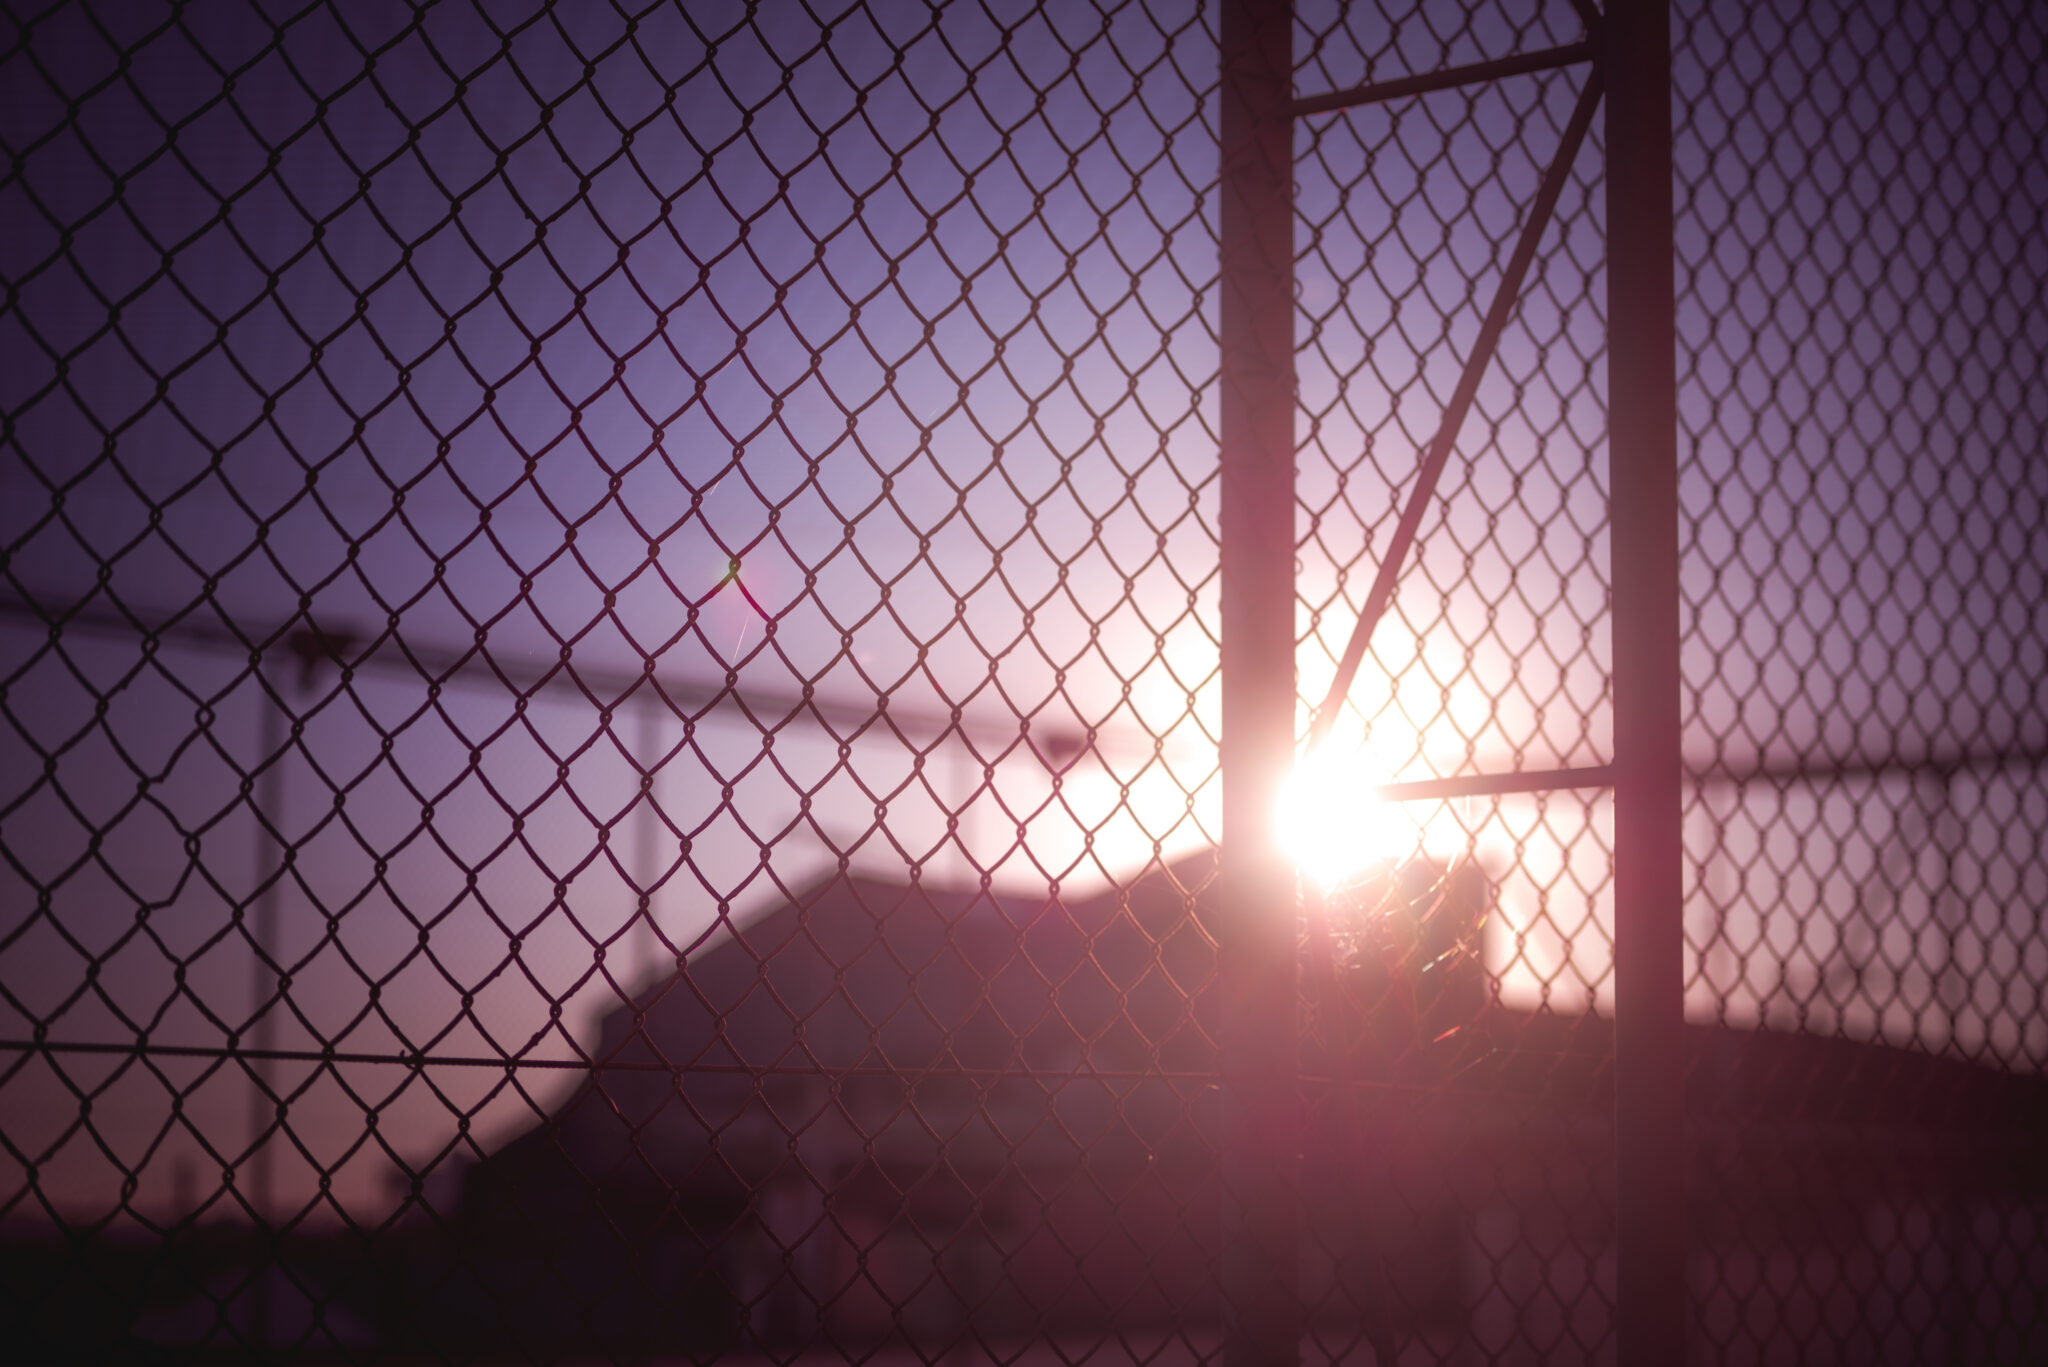 Sunset behind a wire fence.